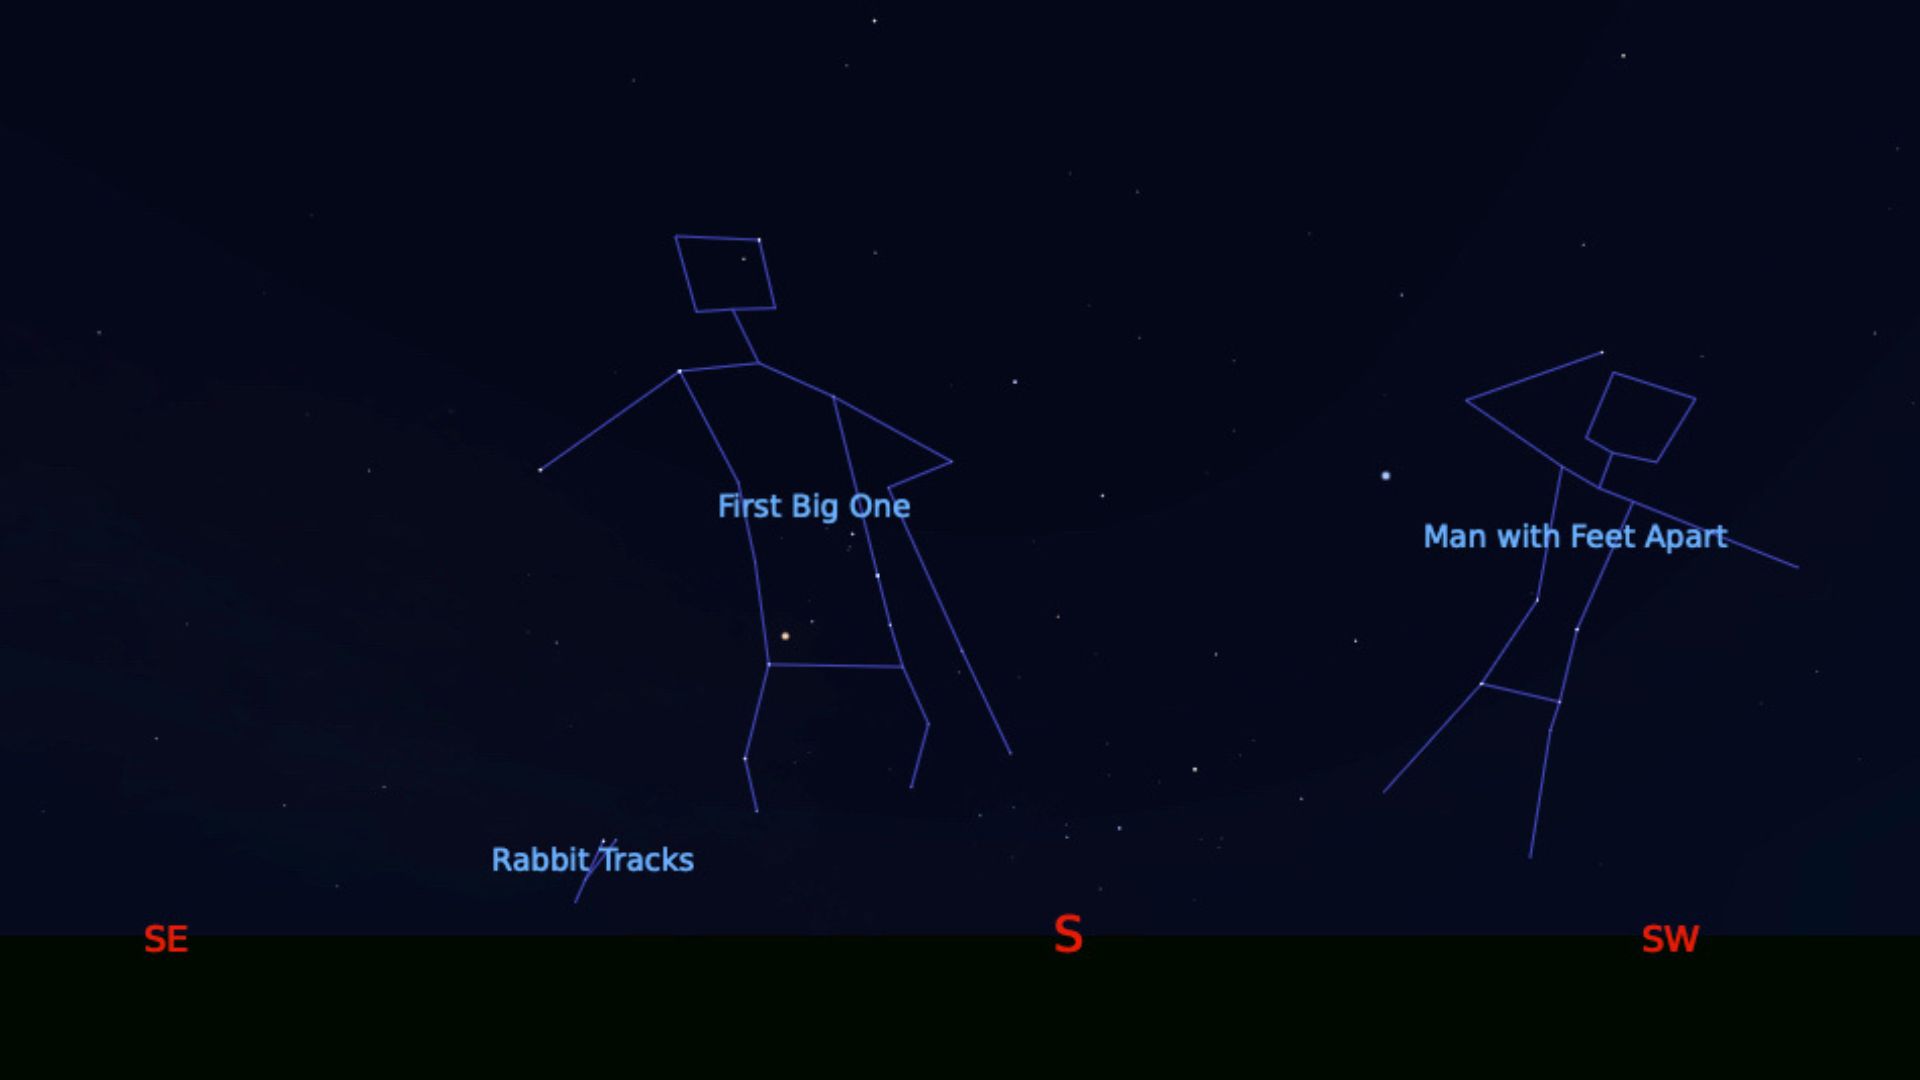 graphic illustration from Stellarium showing two stick figures in the night sky.